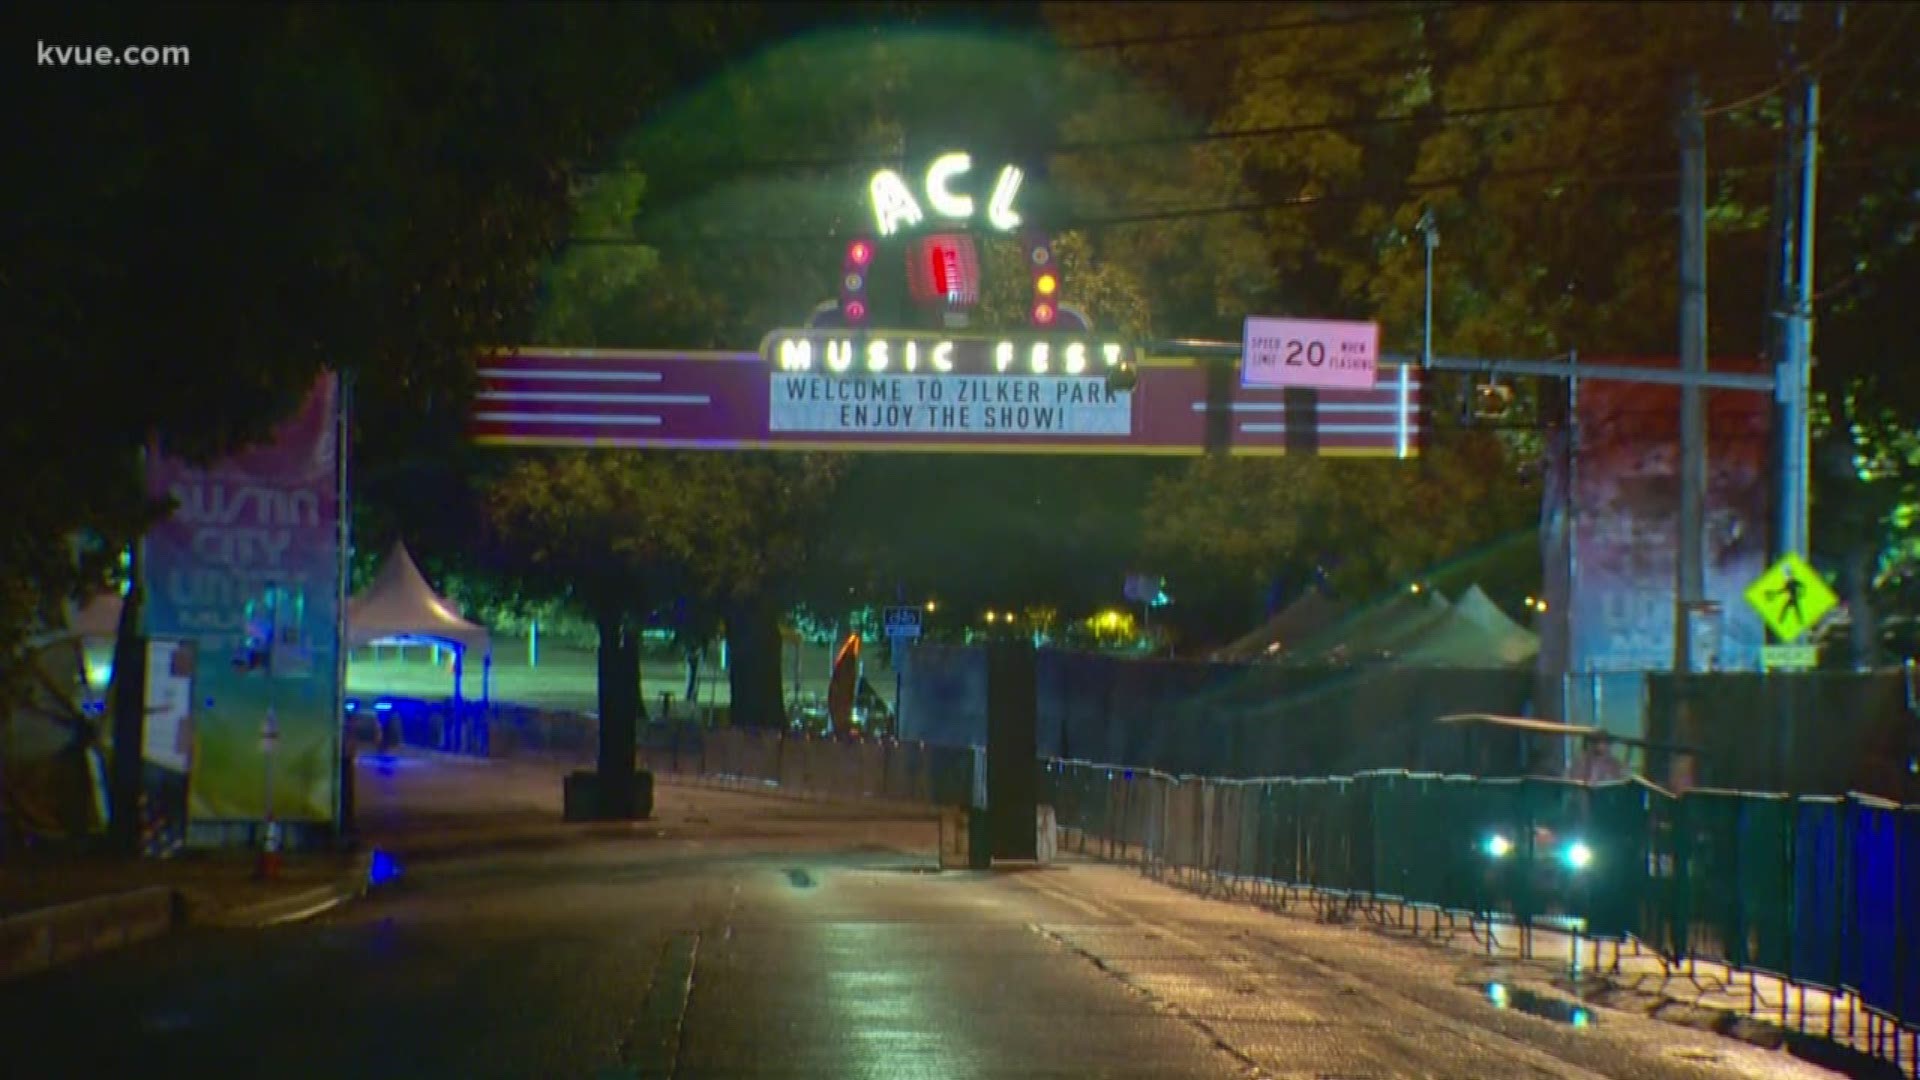 Those going to ACL Fest are helping make Austin greener. That's because a portion of the ticket sales goes to improve Austin parks.